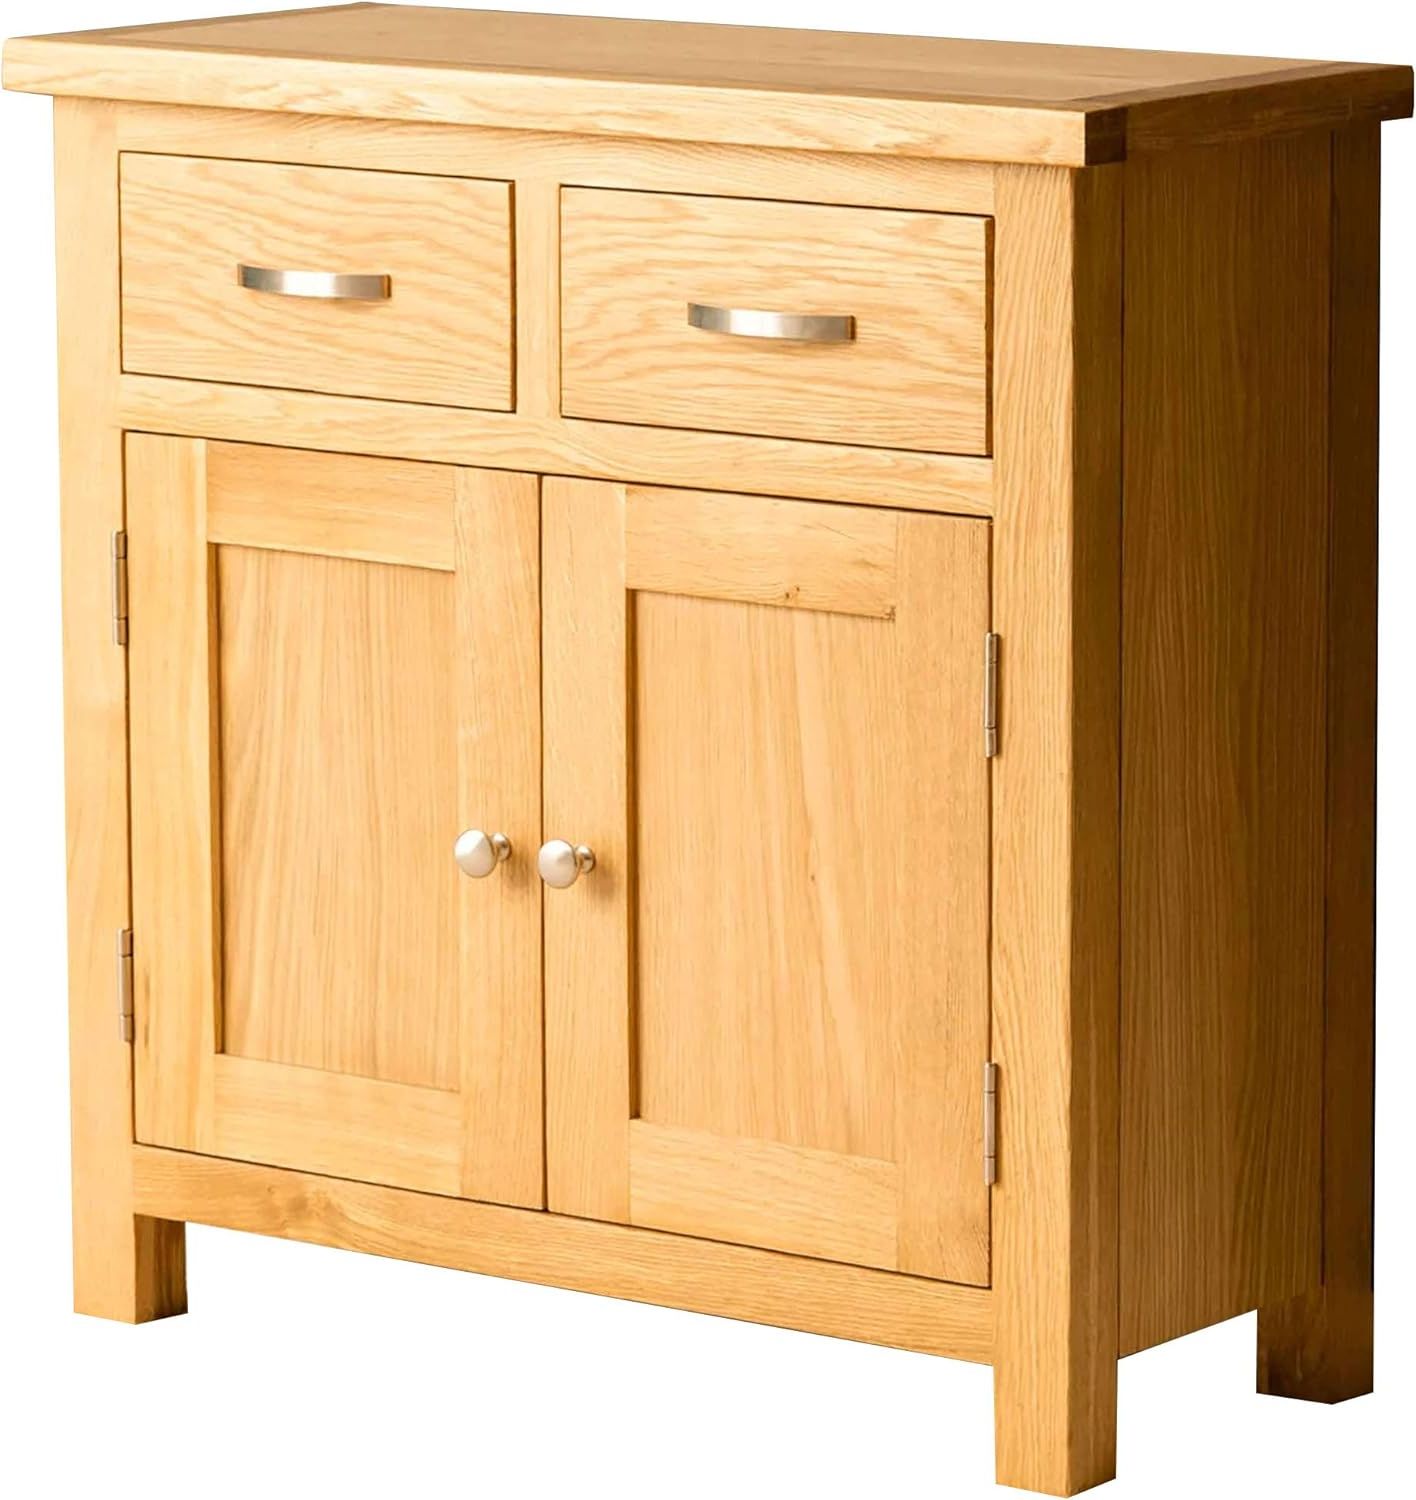 Wood Cabinet With Drawers With Regard To Well Known Roselandfurniture London Oak Mini Sideboard Storage Cabinet With (View 5 of 15)